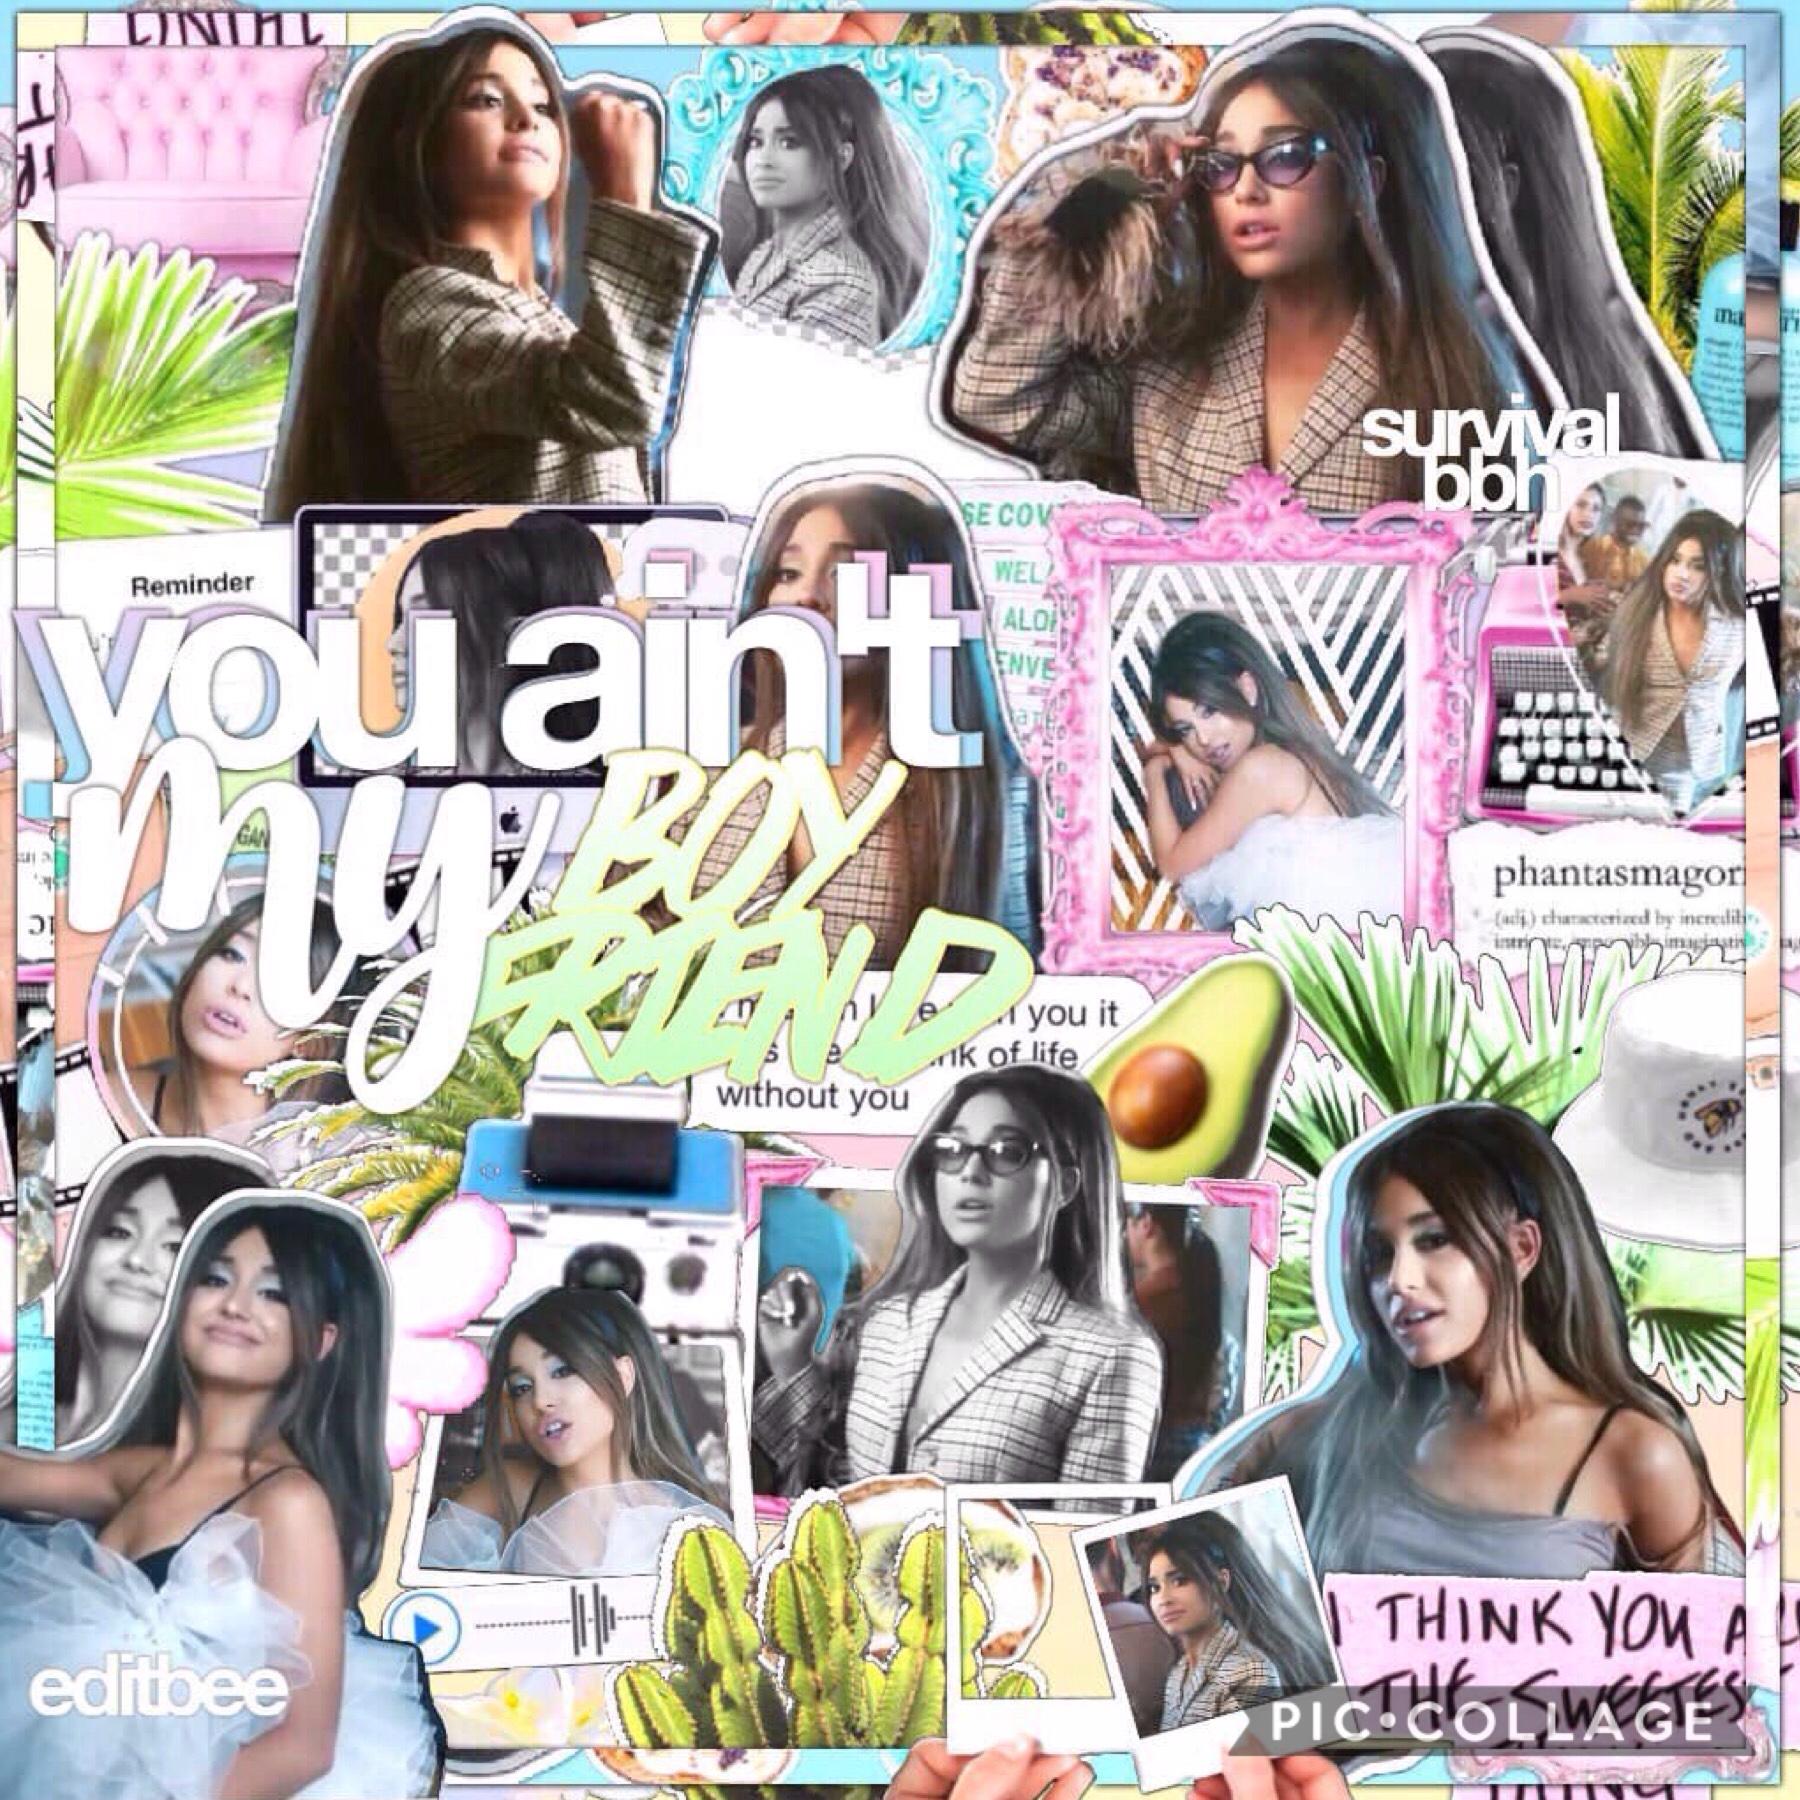 collab with @editbee🐝💗 this song is such a bop. QOTD: favorite ariana song off her album "thank u, next"?💚